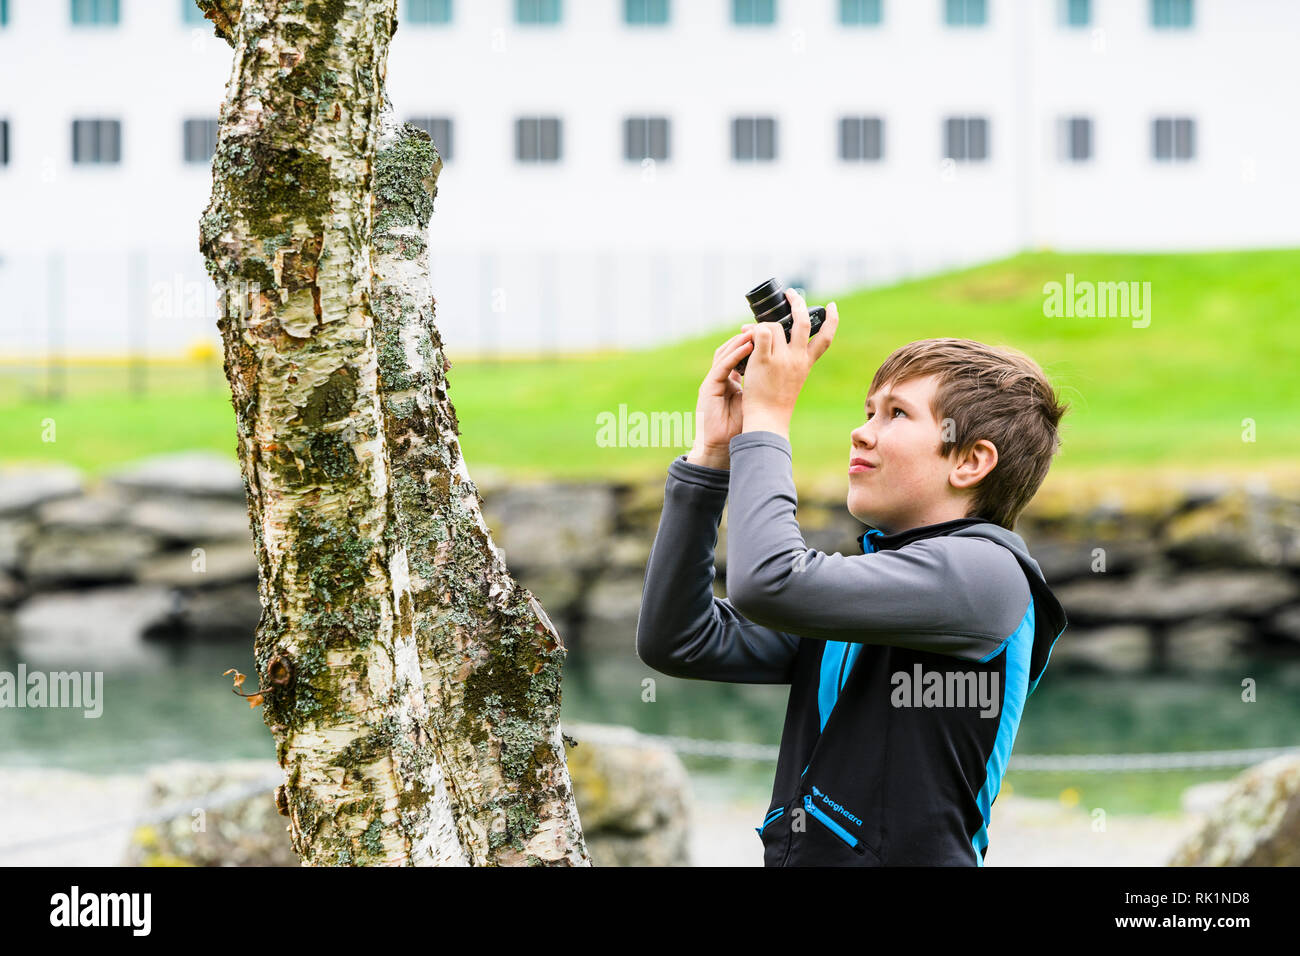 Candid portrait of boy photographing tree with digital camera, colour image Stock Photo